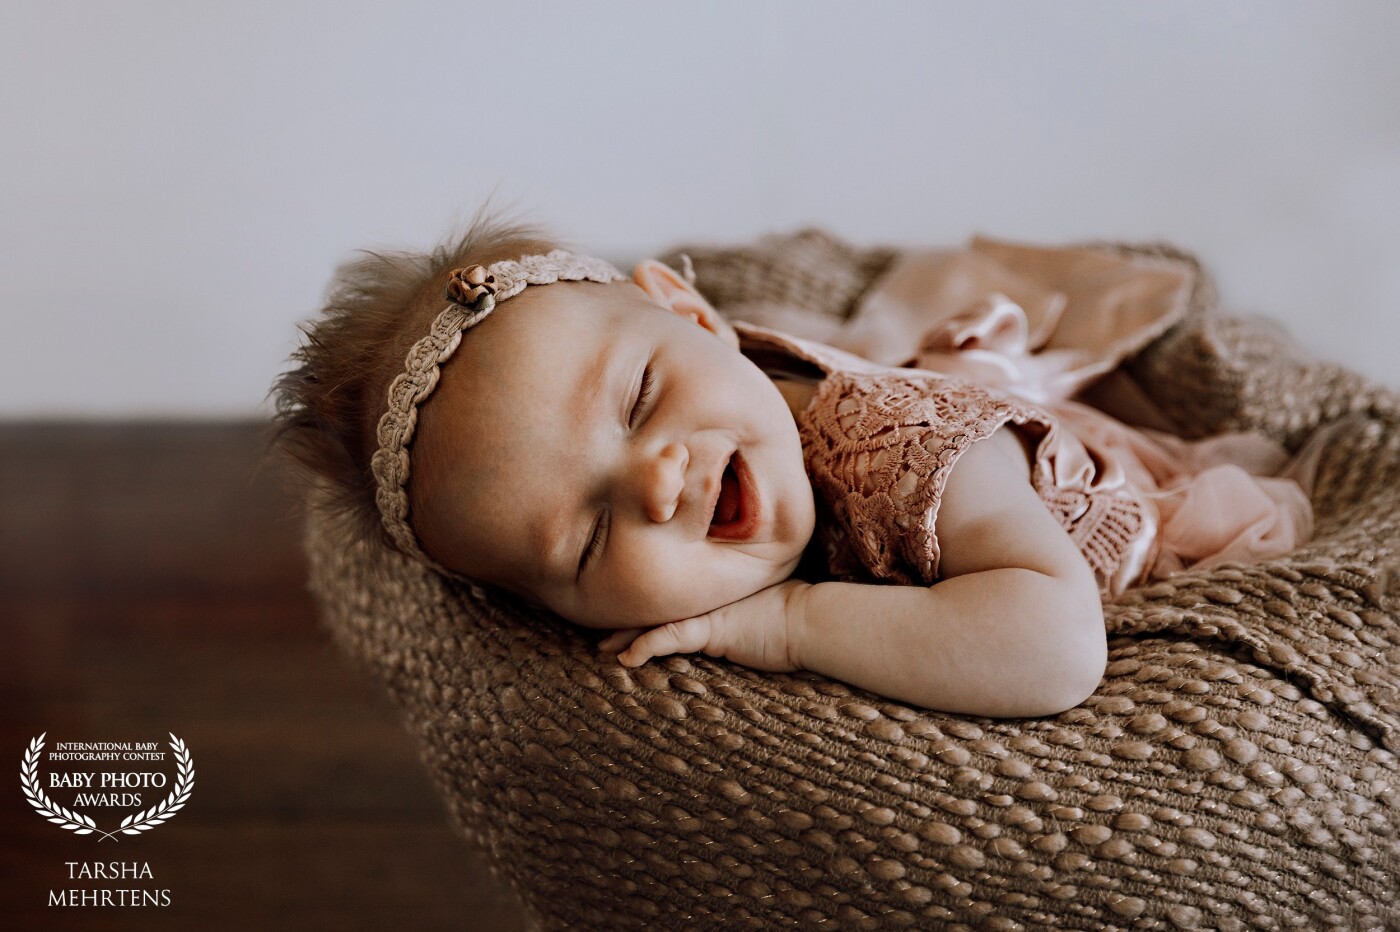 9 weeks new, I was so happy to capture a sleep smile from her and the fact she slept at all was amazing! Lifestyle session at home.